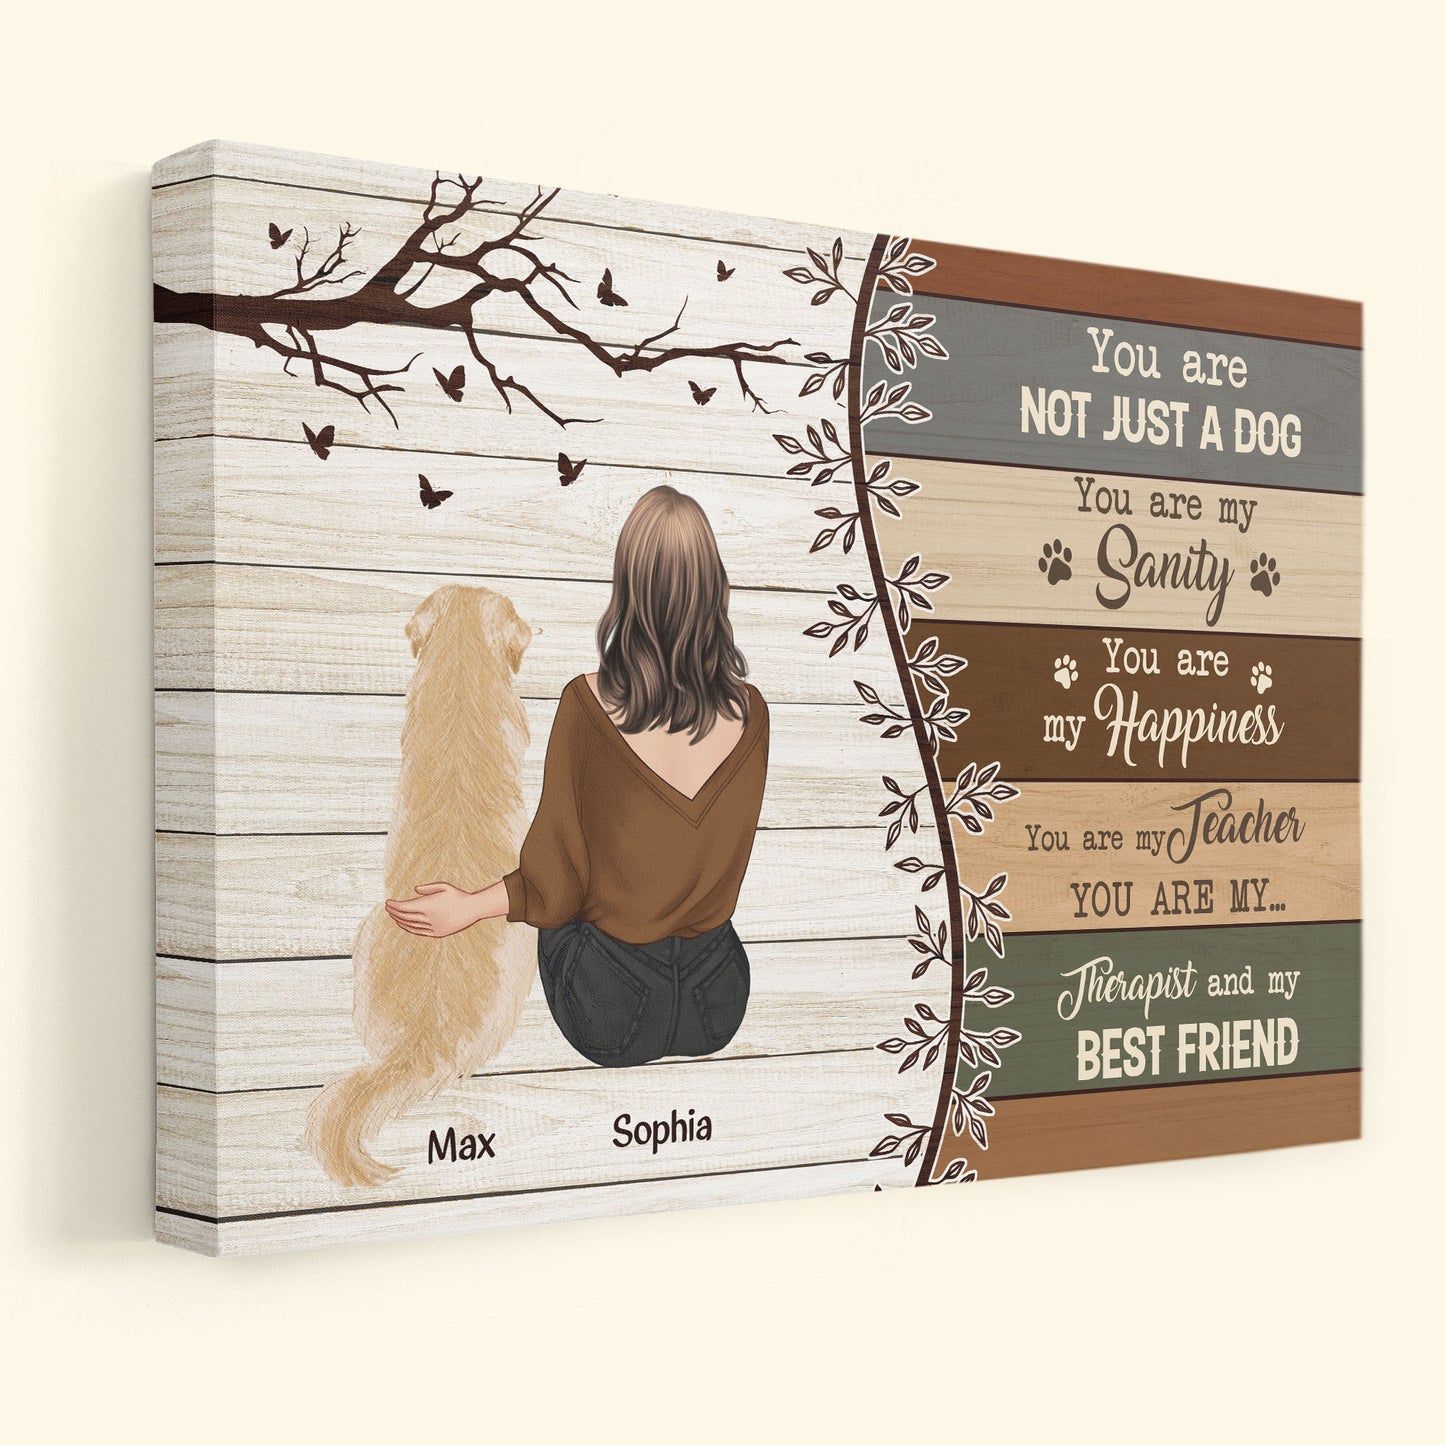 You're Not Just A Dog - Personalized Poster/Wrapped Canvas